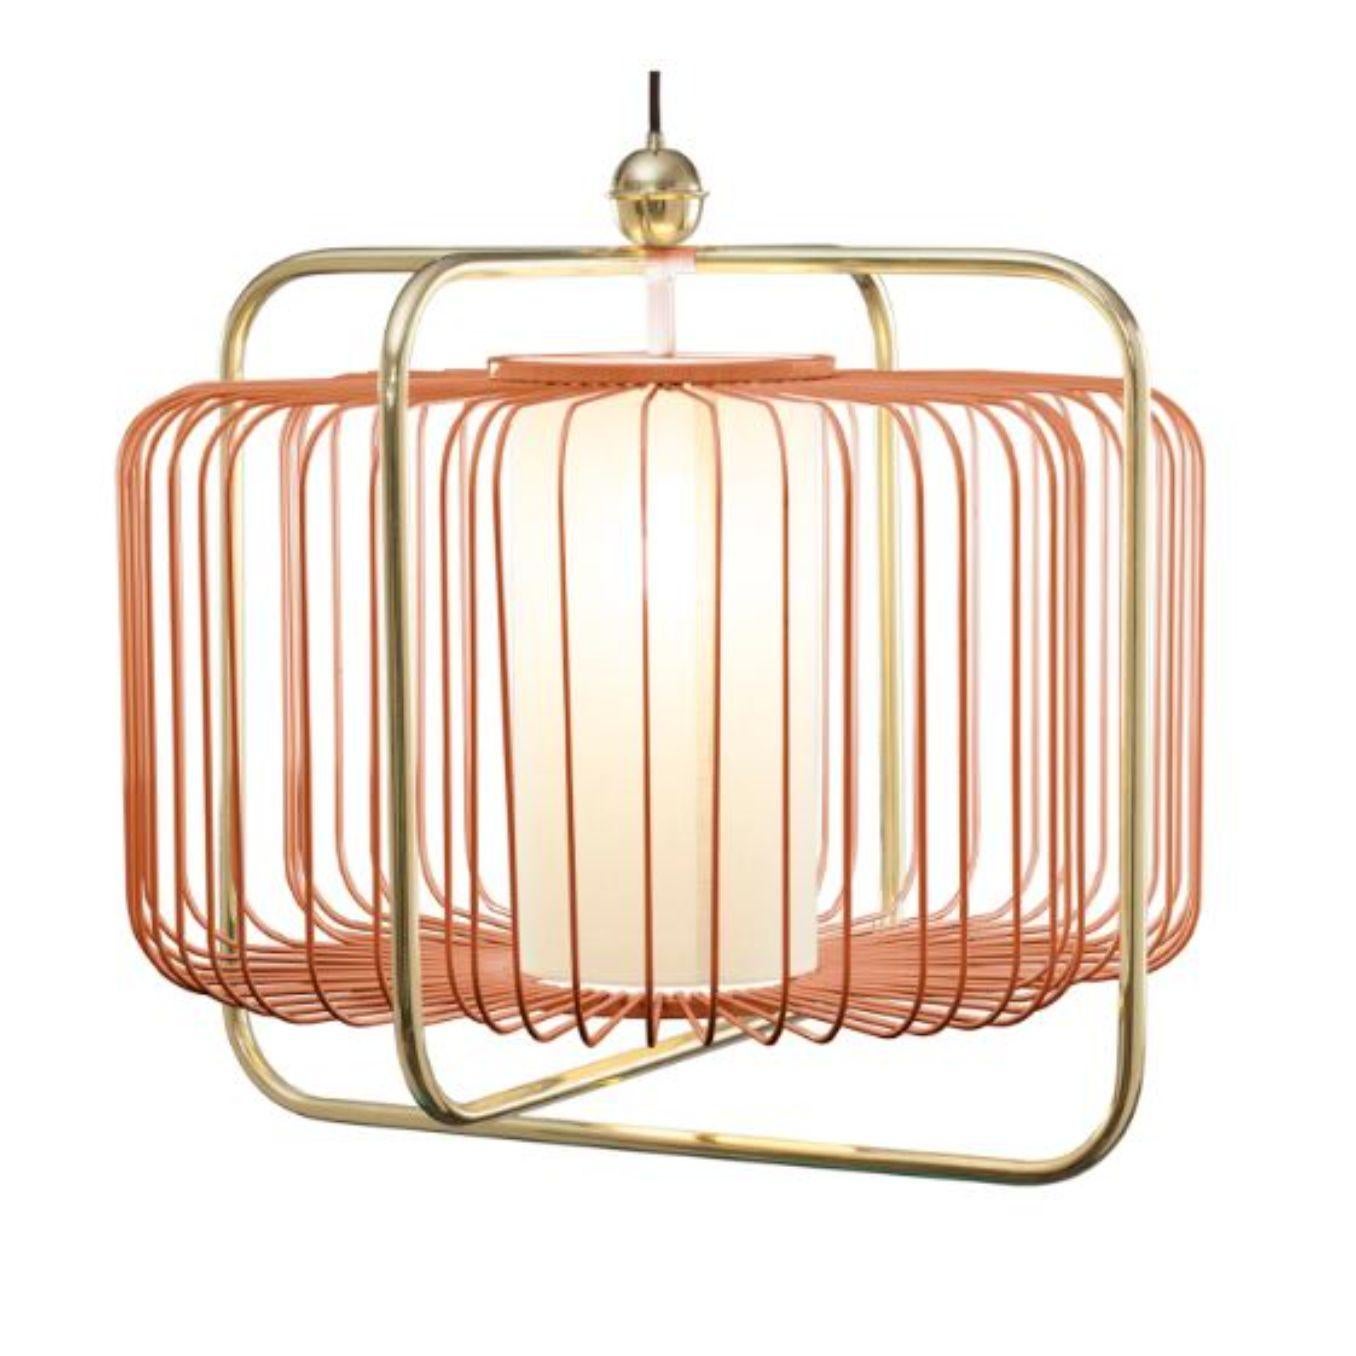 Brass and Salmon Jules I Suspension lamp by Dooq
Dimensions: W 63 x D 63 x H 57 cm
Materials: lacquered metal, polished or brushed metal, brass.
abat-jour: cotton
Also available in different colors and materials.